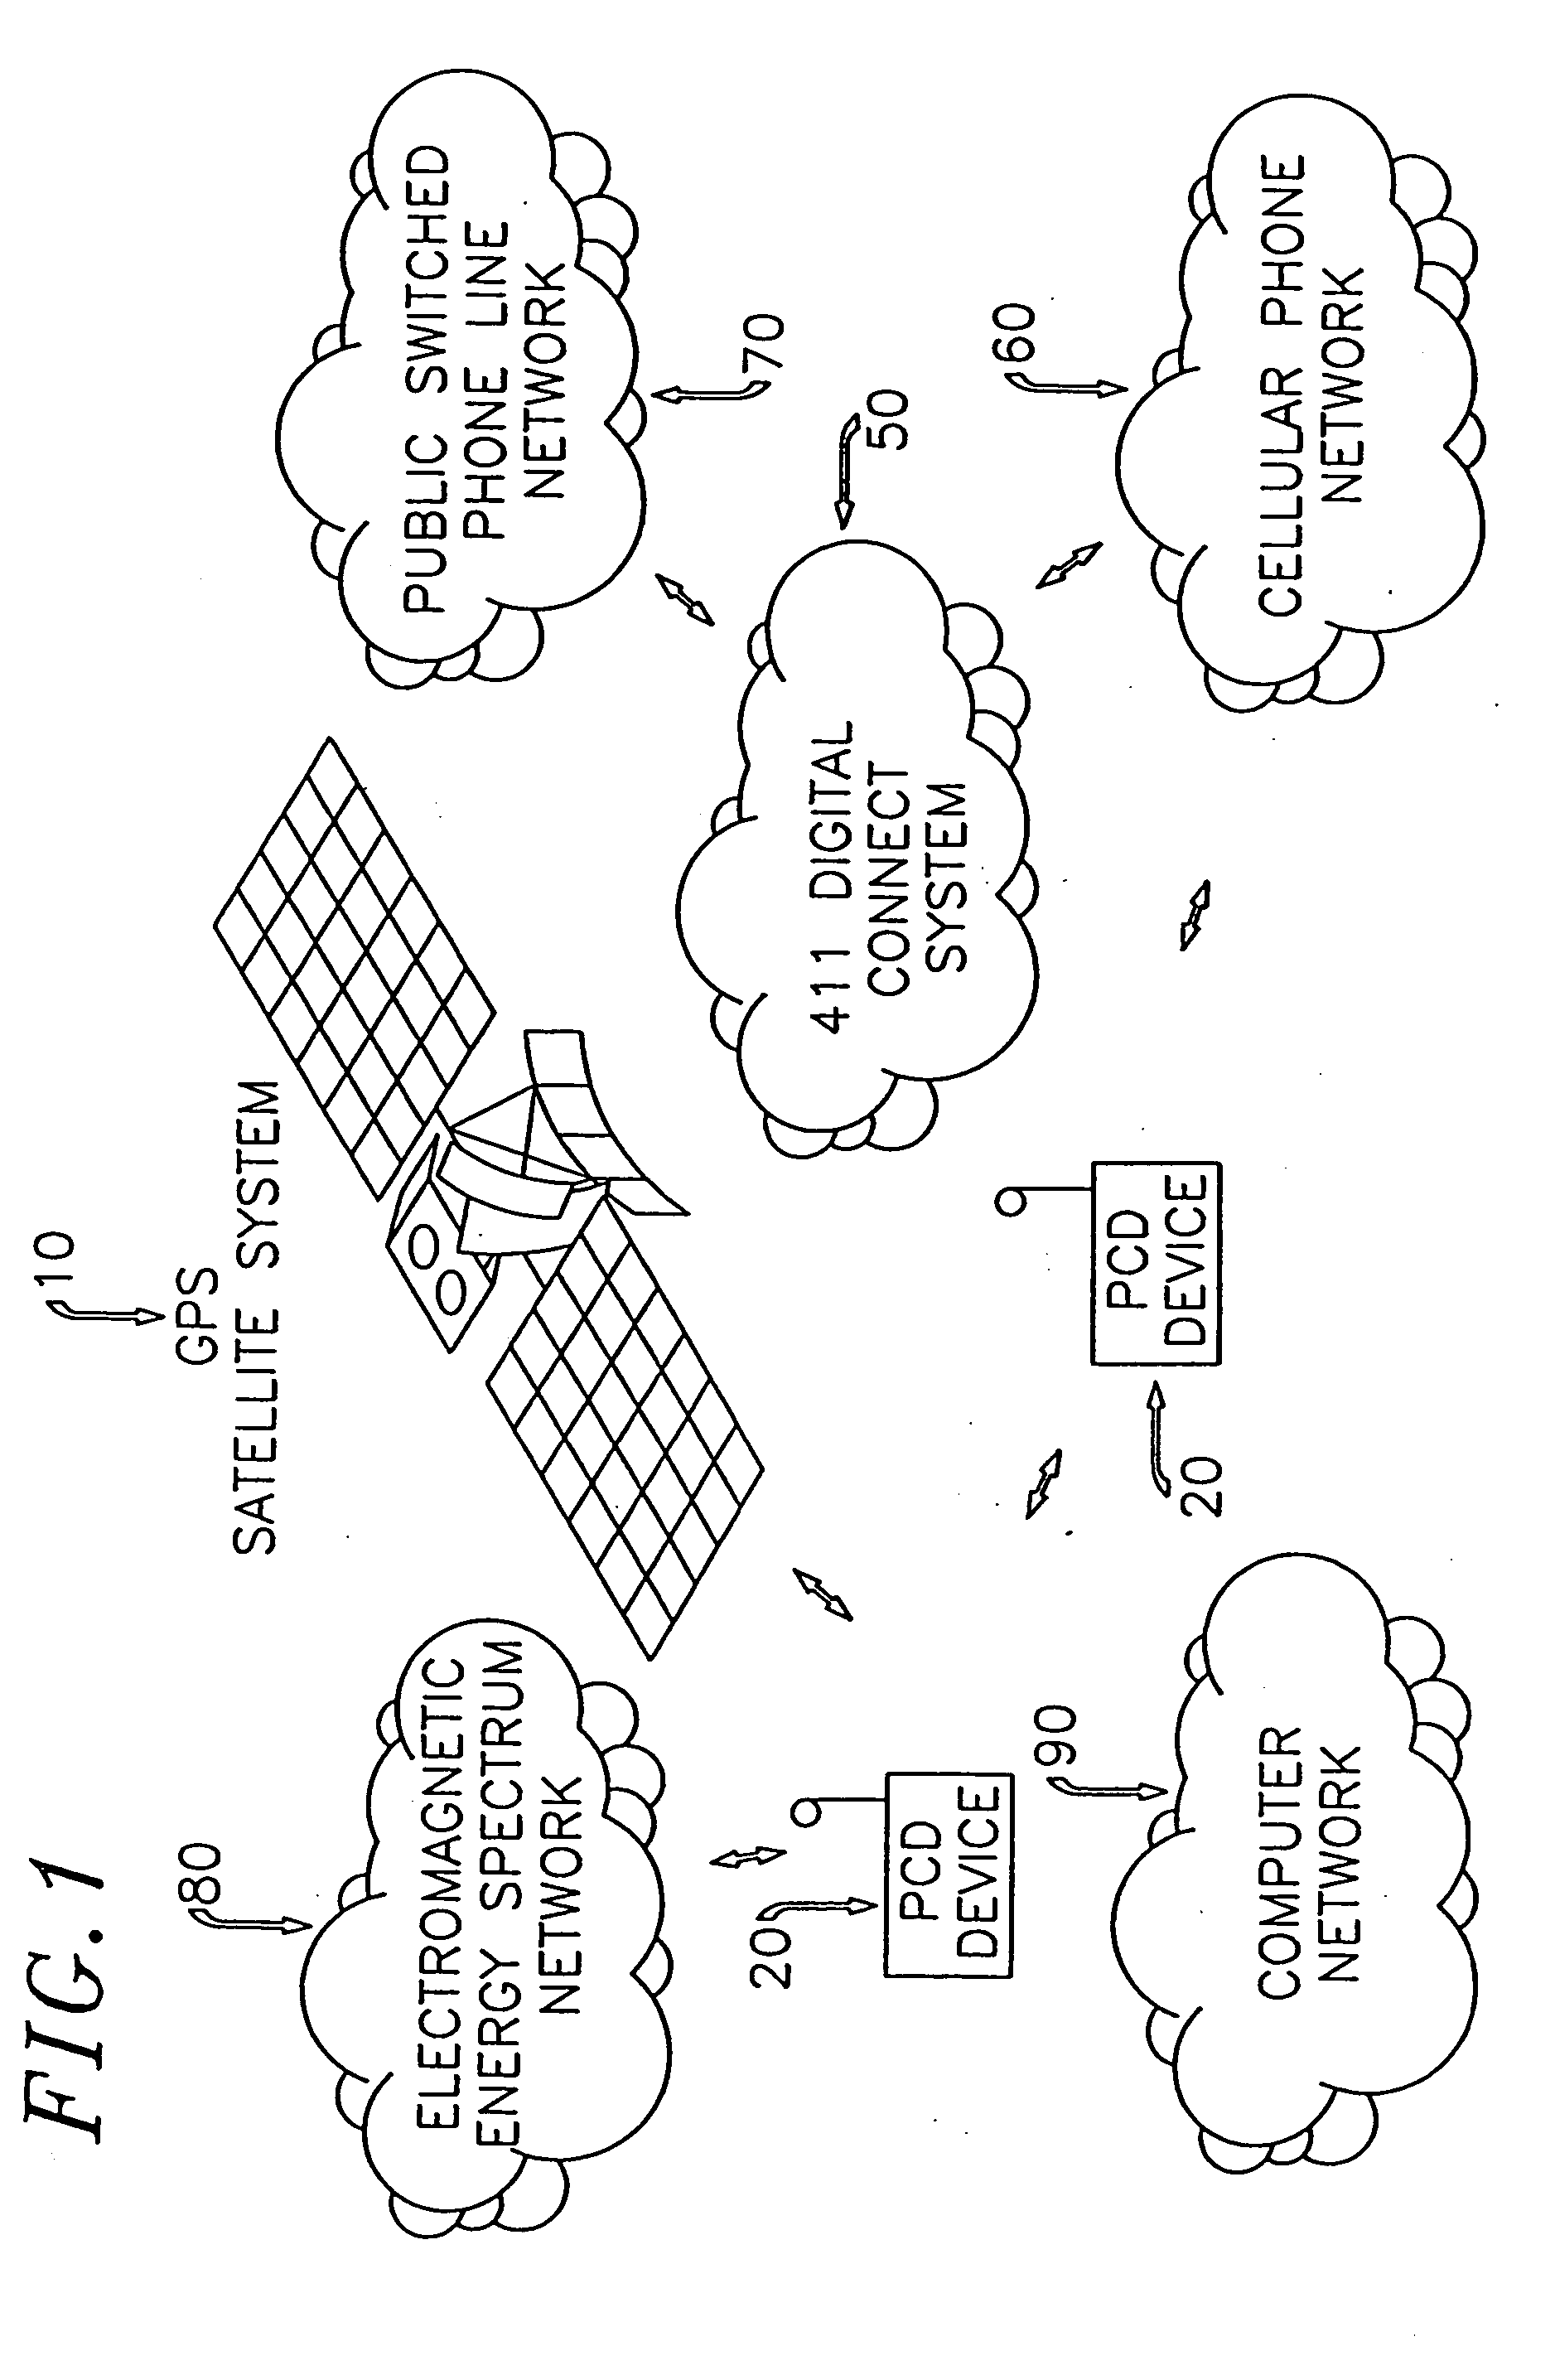 Personal communication system for communicating voice data positioning information